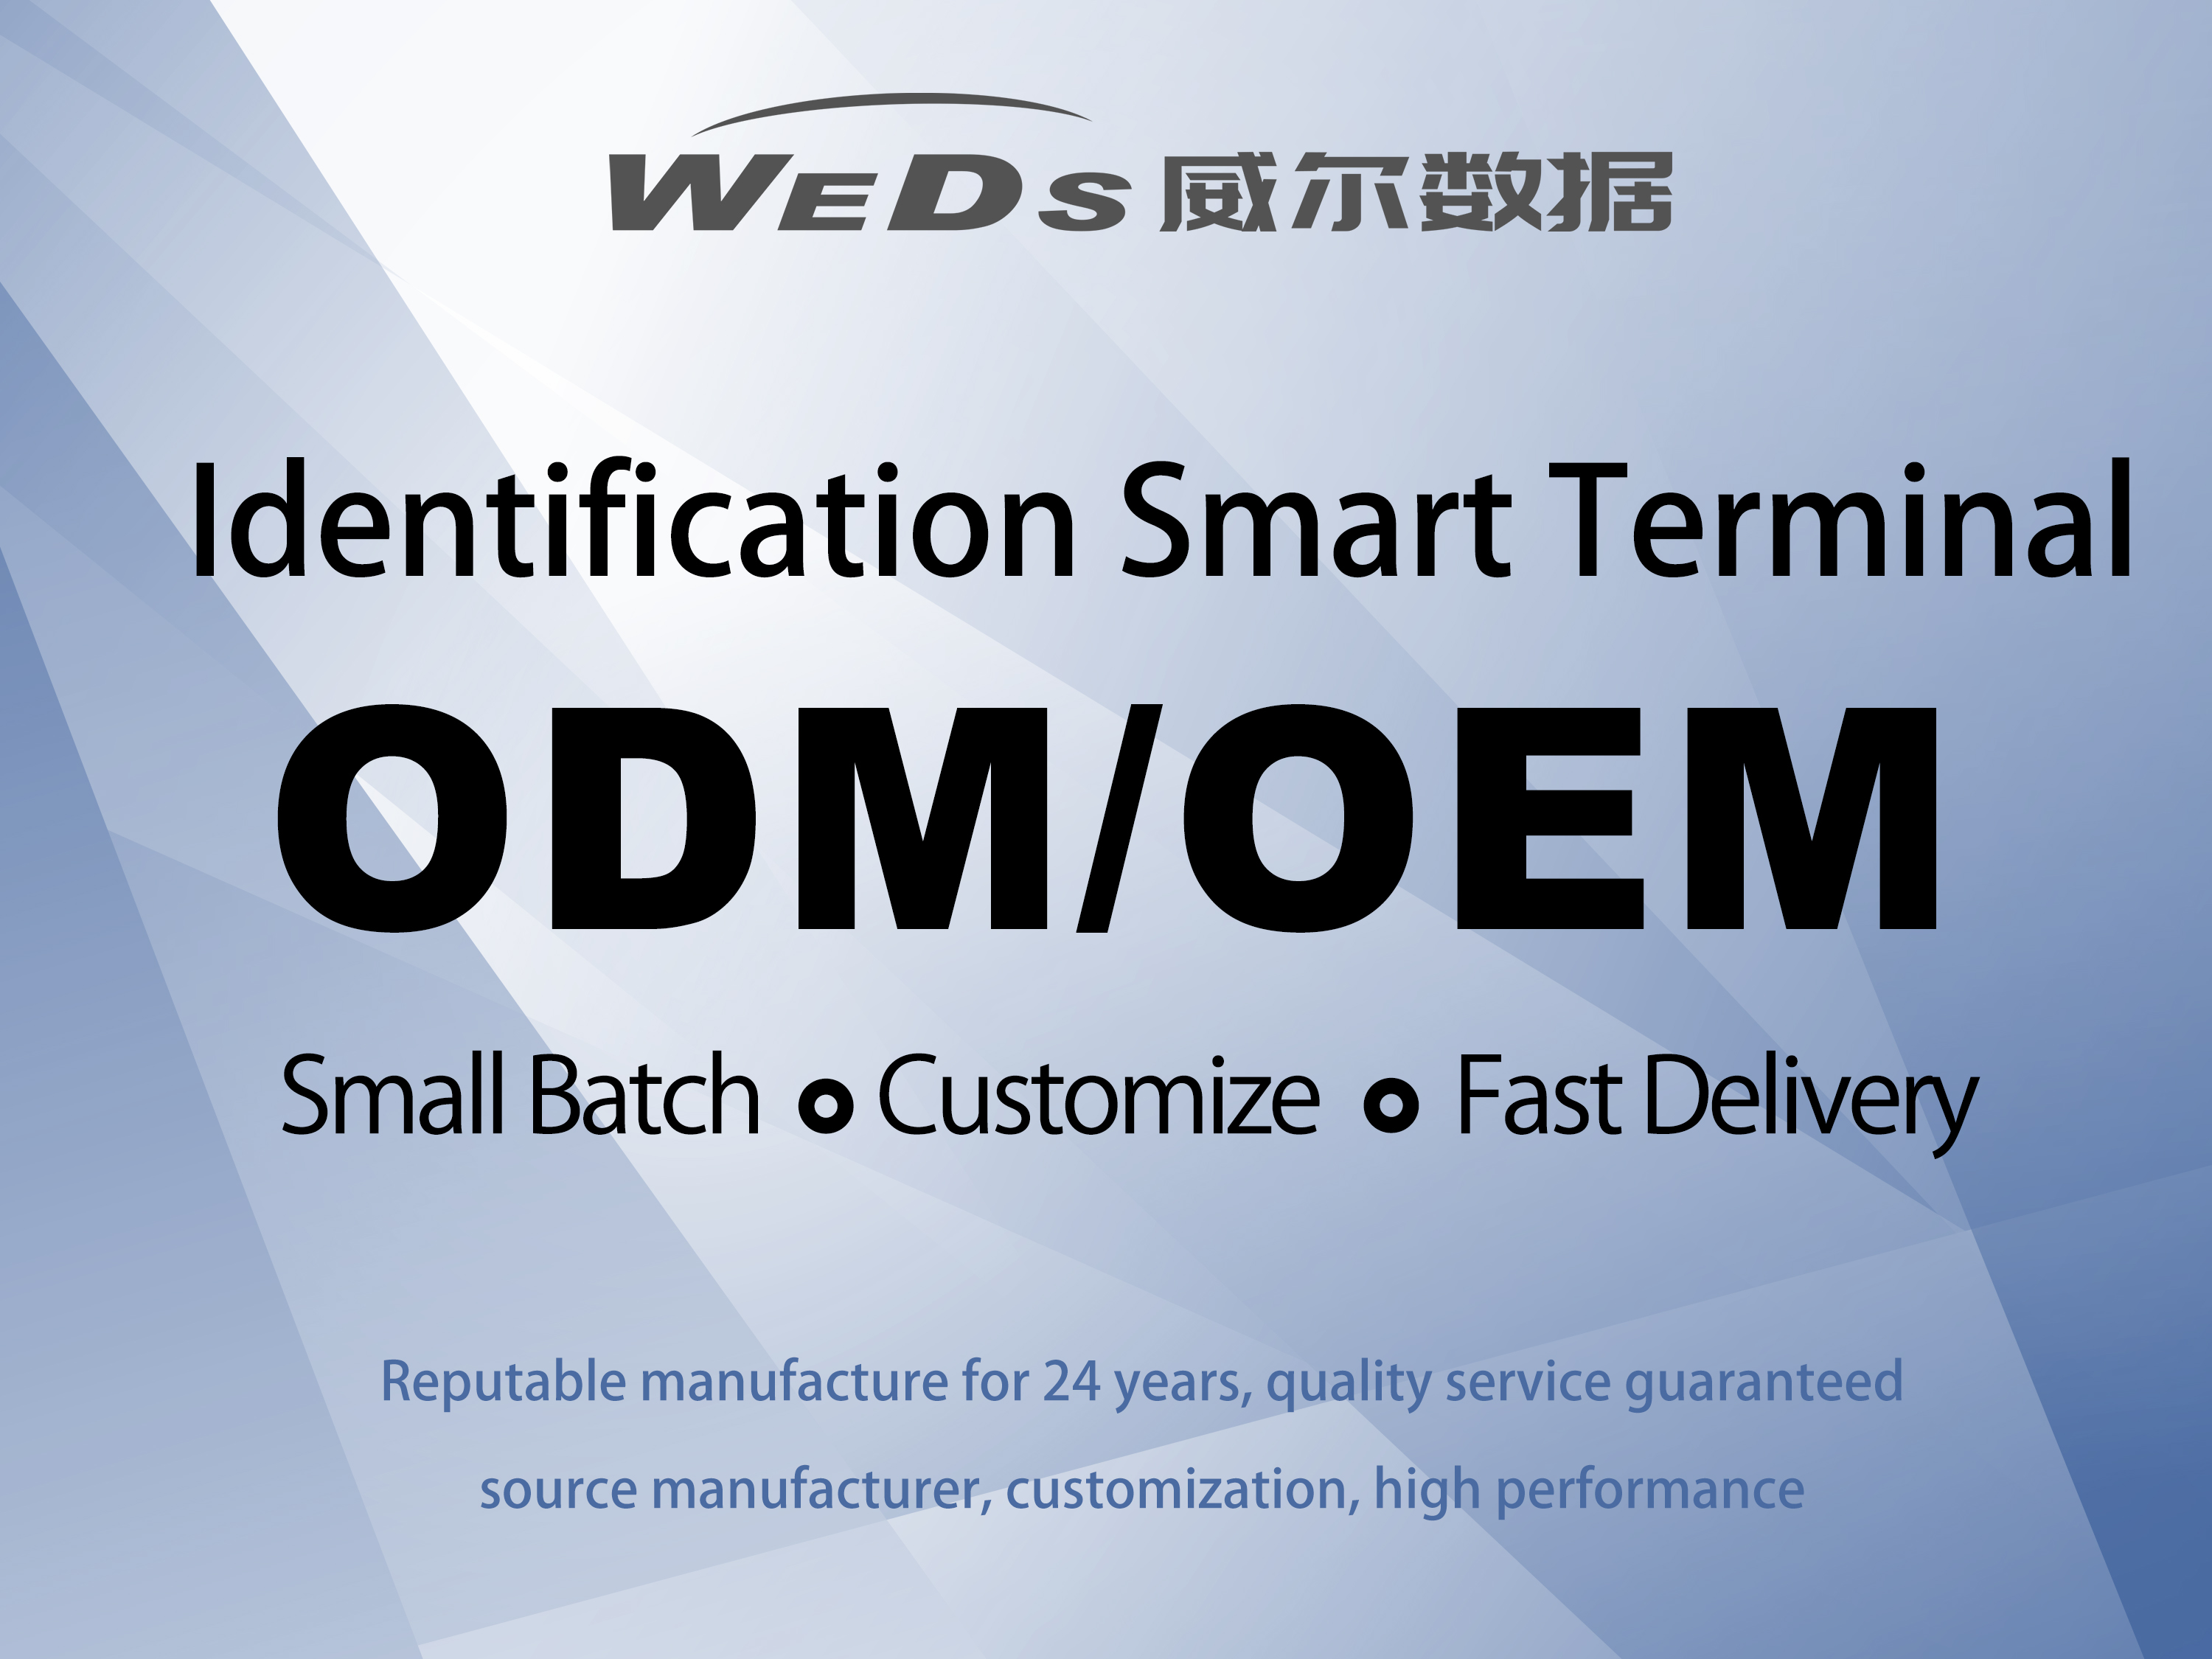 OEM/ODM identity recognition product manufacturer, specializing in 27 years of creating high-quality hardware products